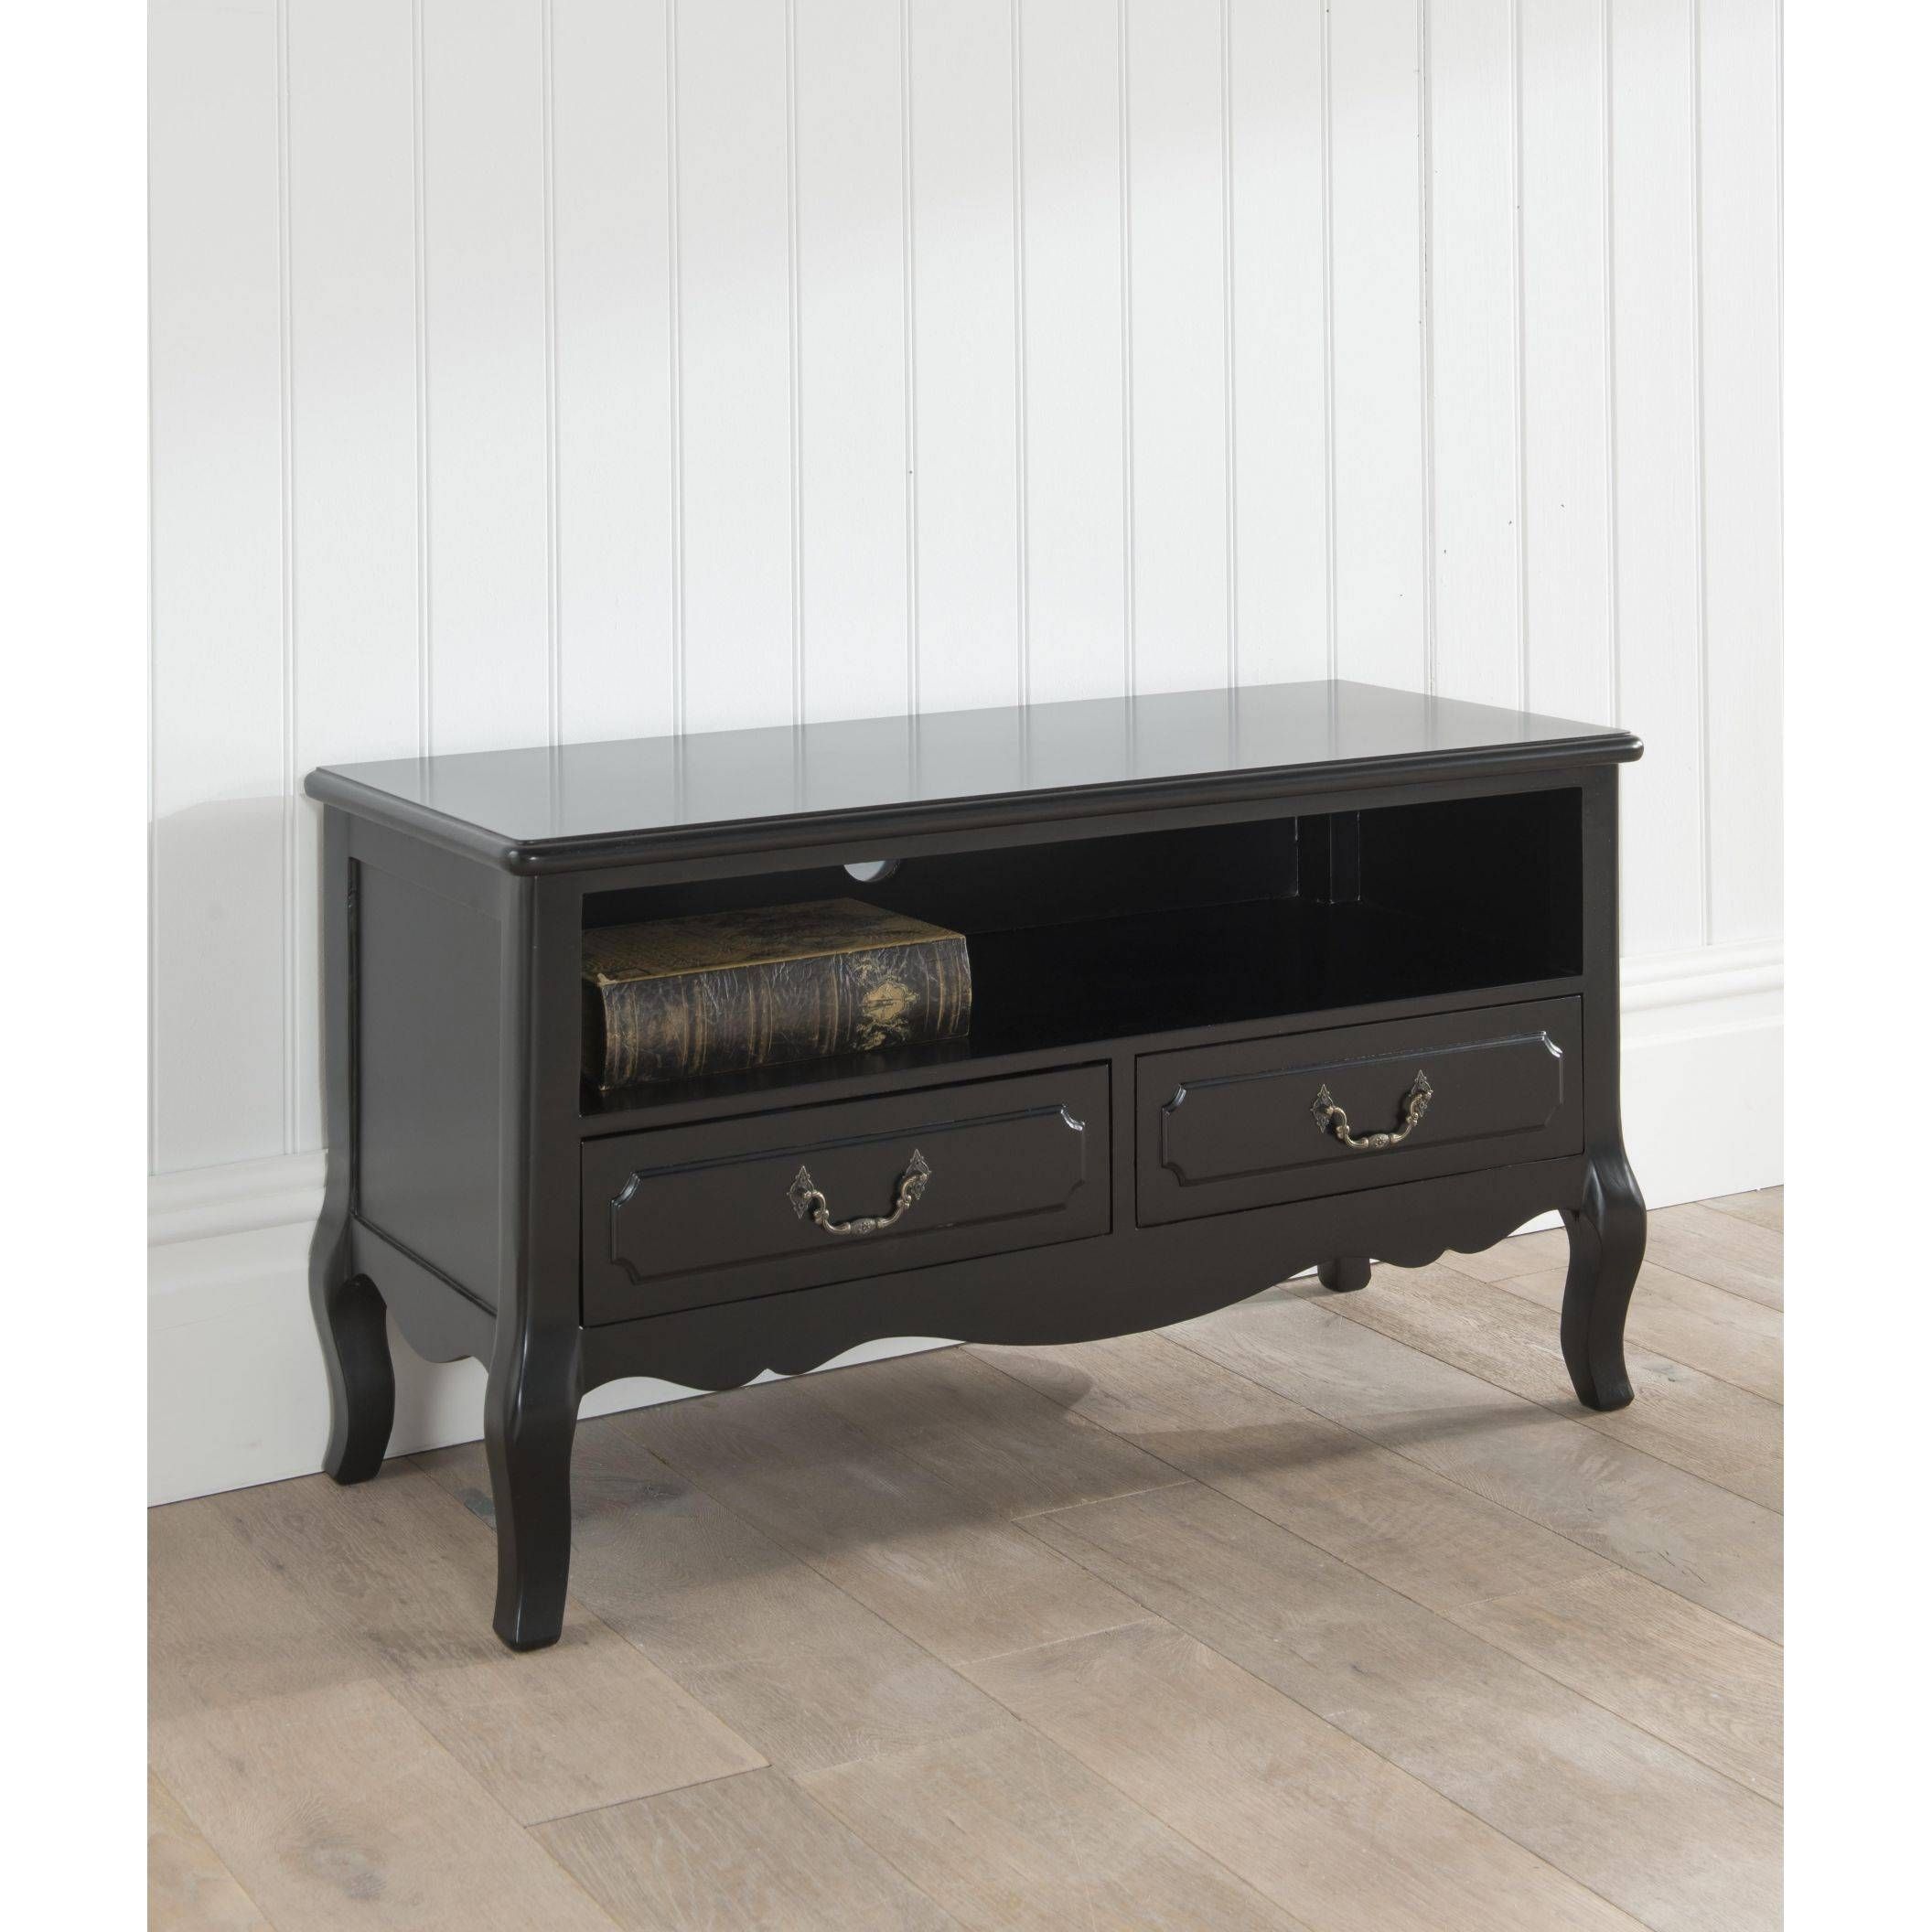 Antique French Tv Stand | Black French Style Furniture With Regard To French Style Tv Cabinets (View 2 of 15)